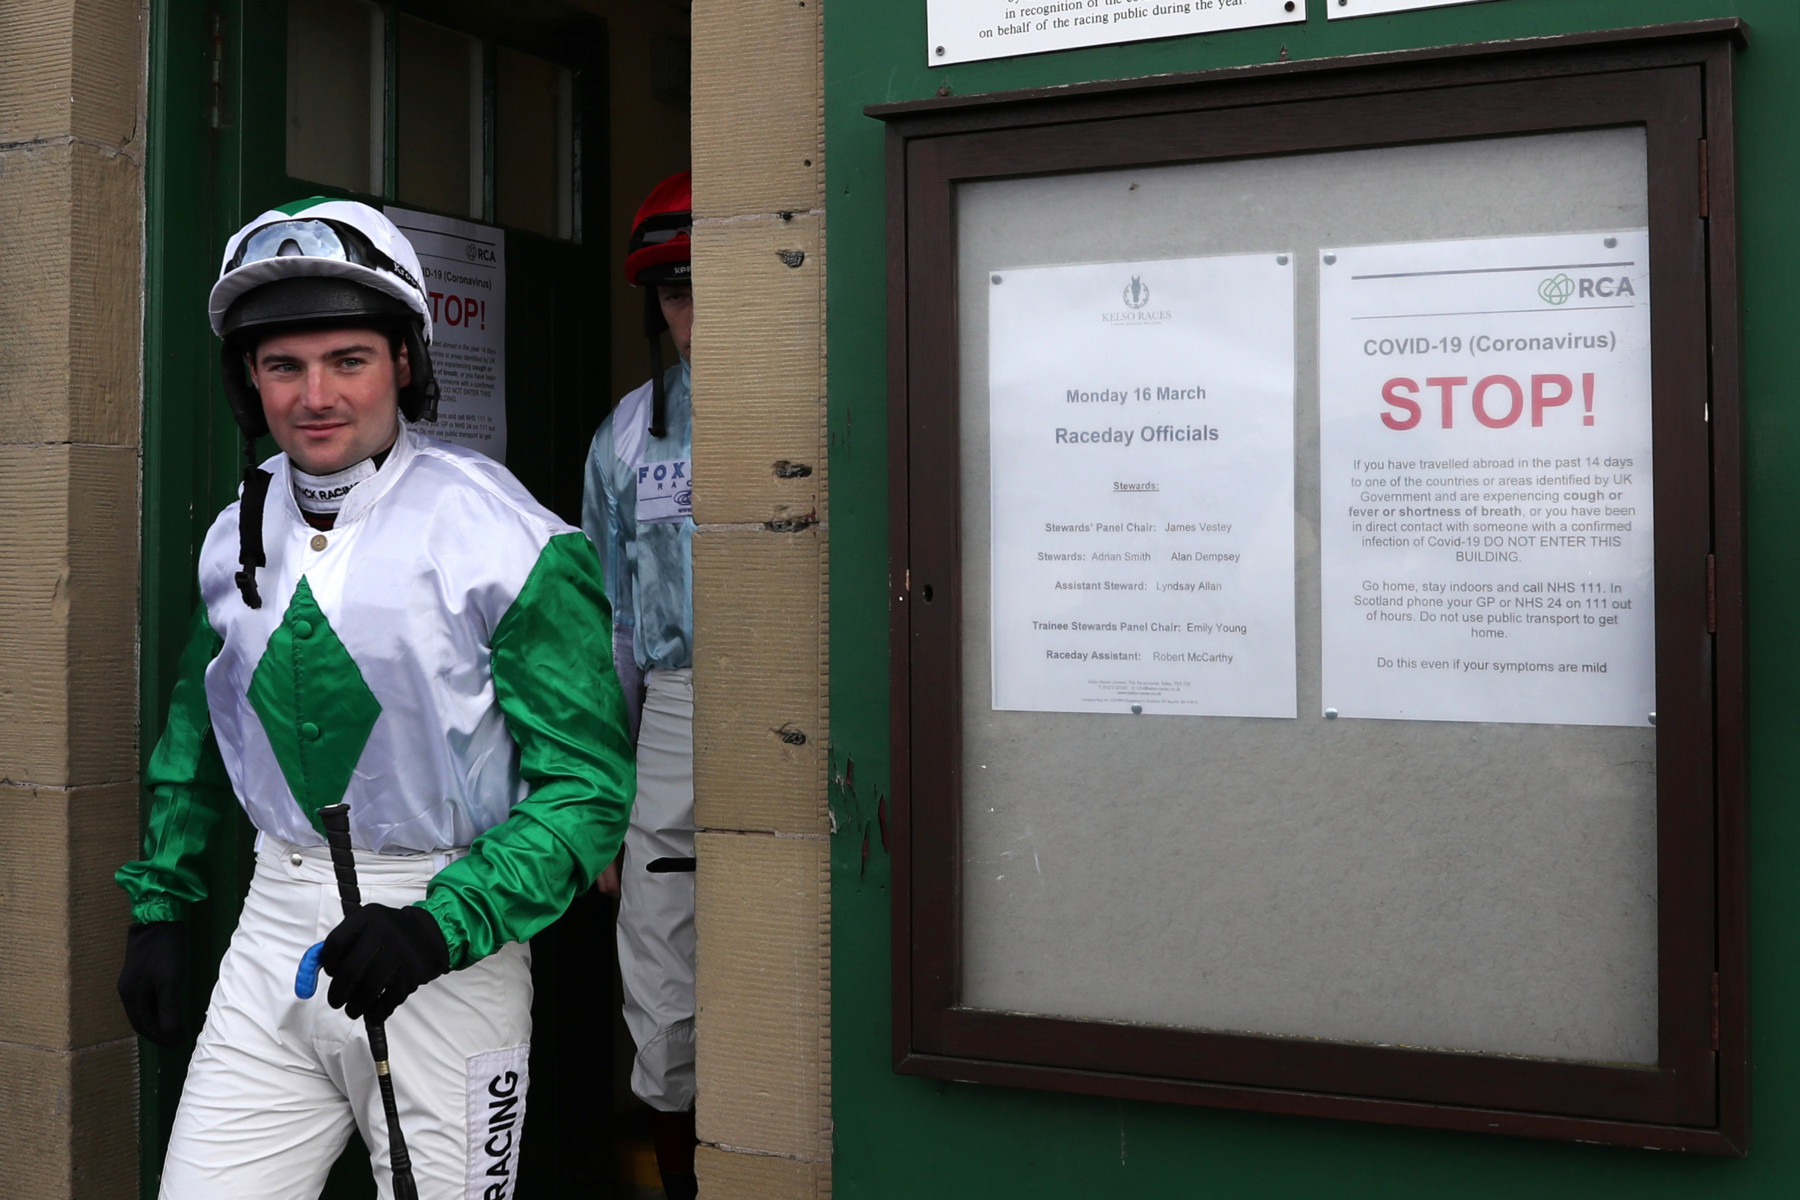 , Kelso becomes the first racecourse in the UK to stage racing behind closed doors due to Coronavirus